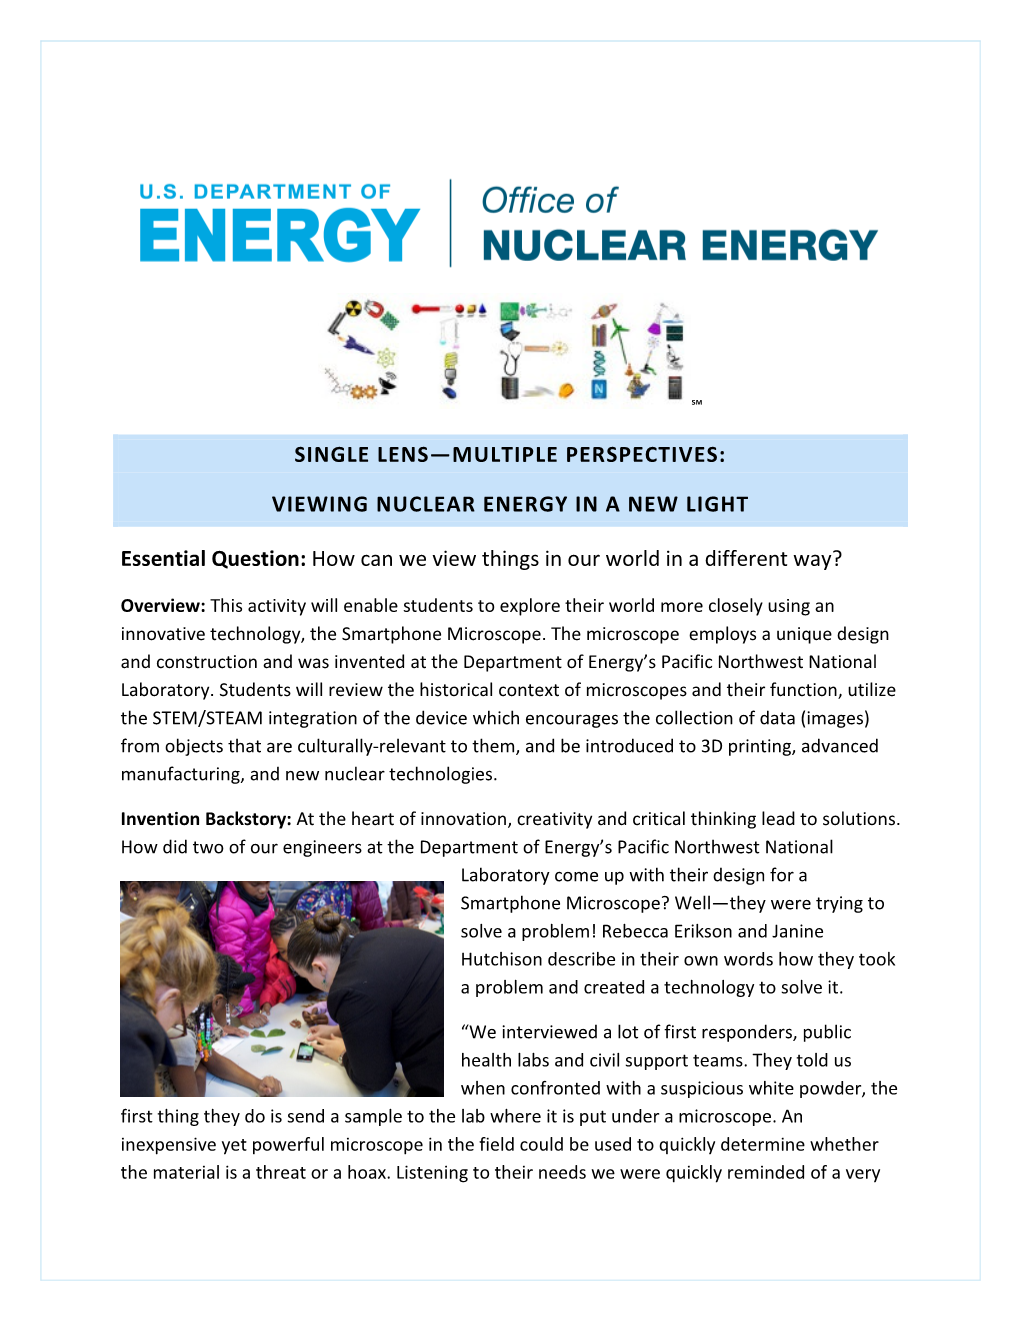 Nuclear Energy and the Smartphone Microscope STEM Activity